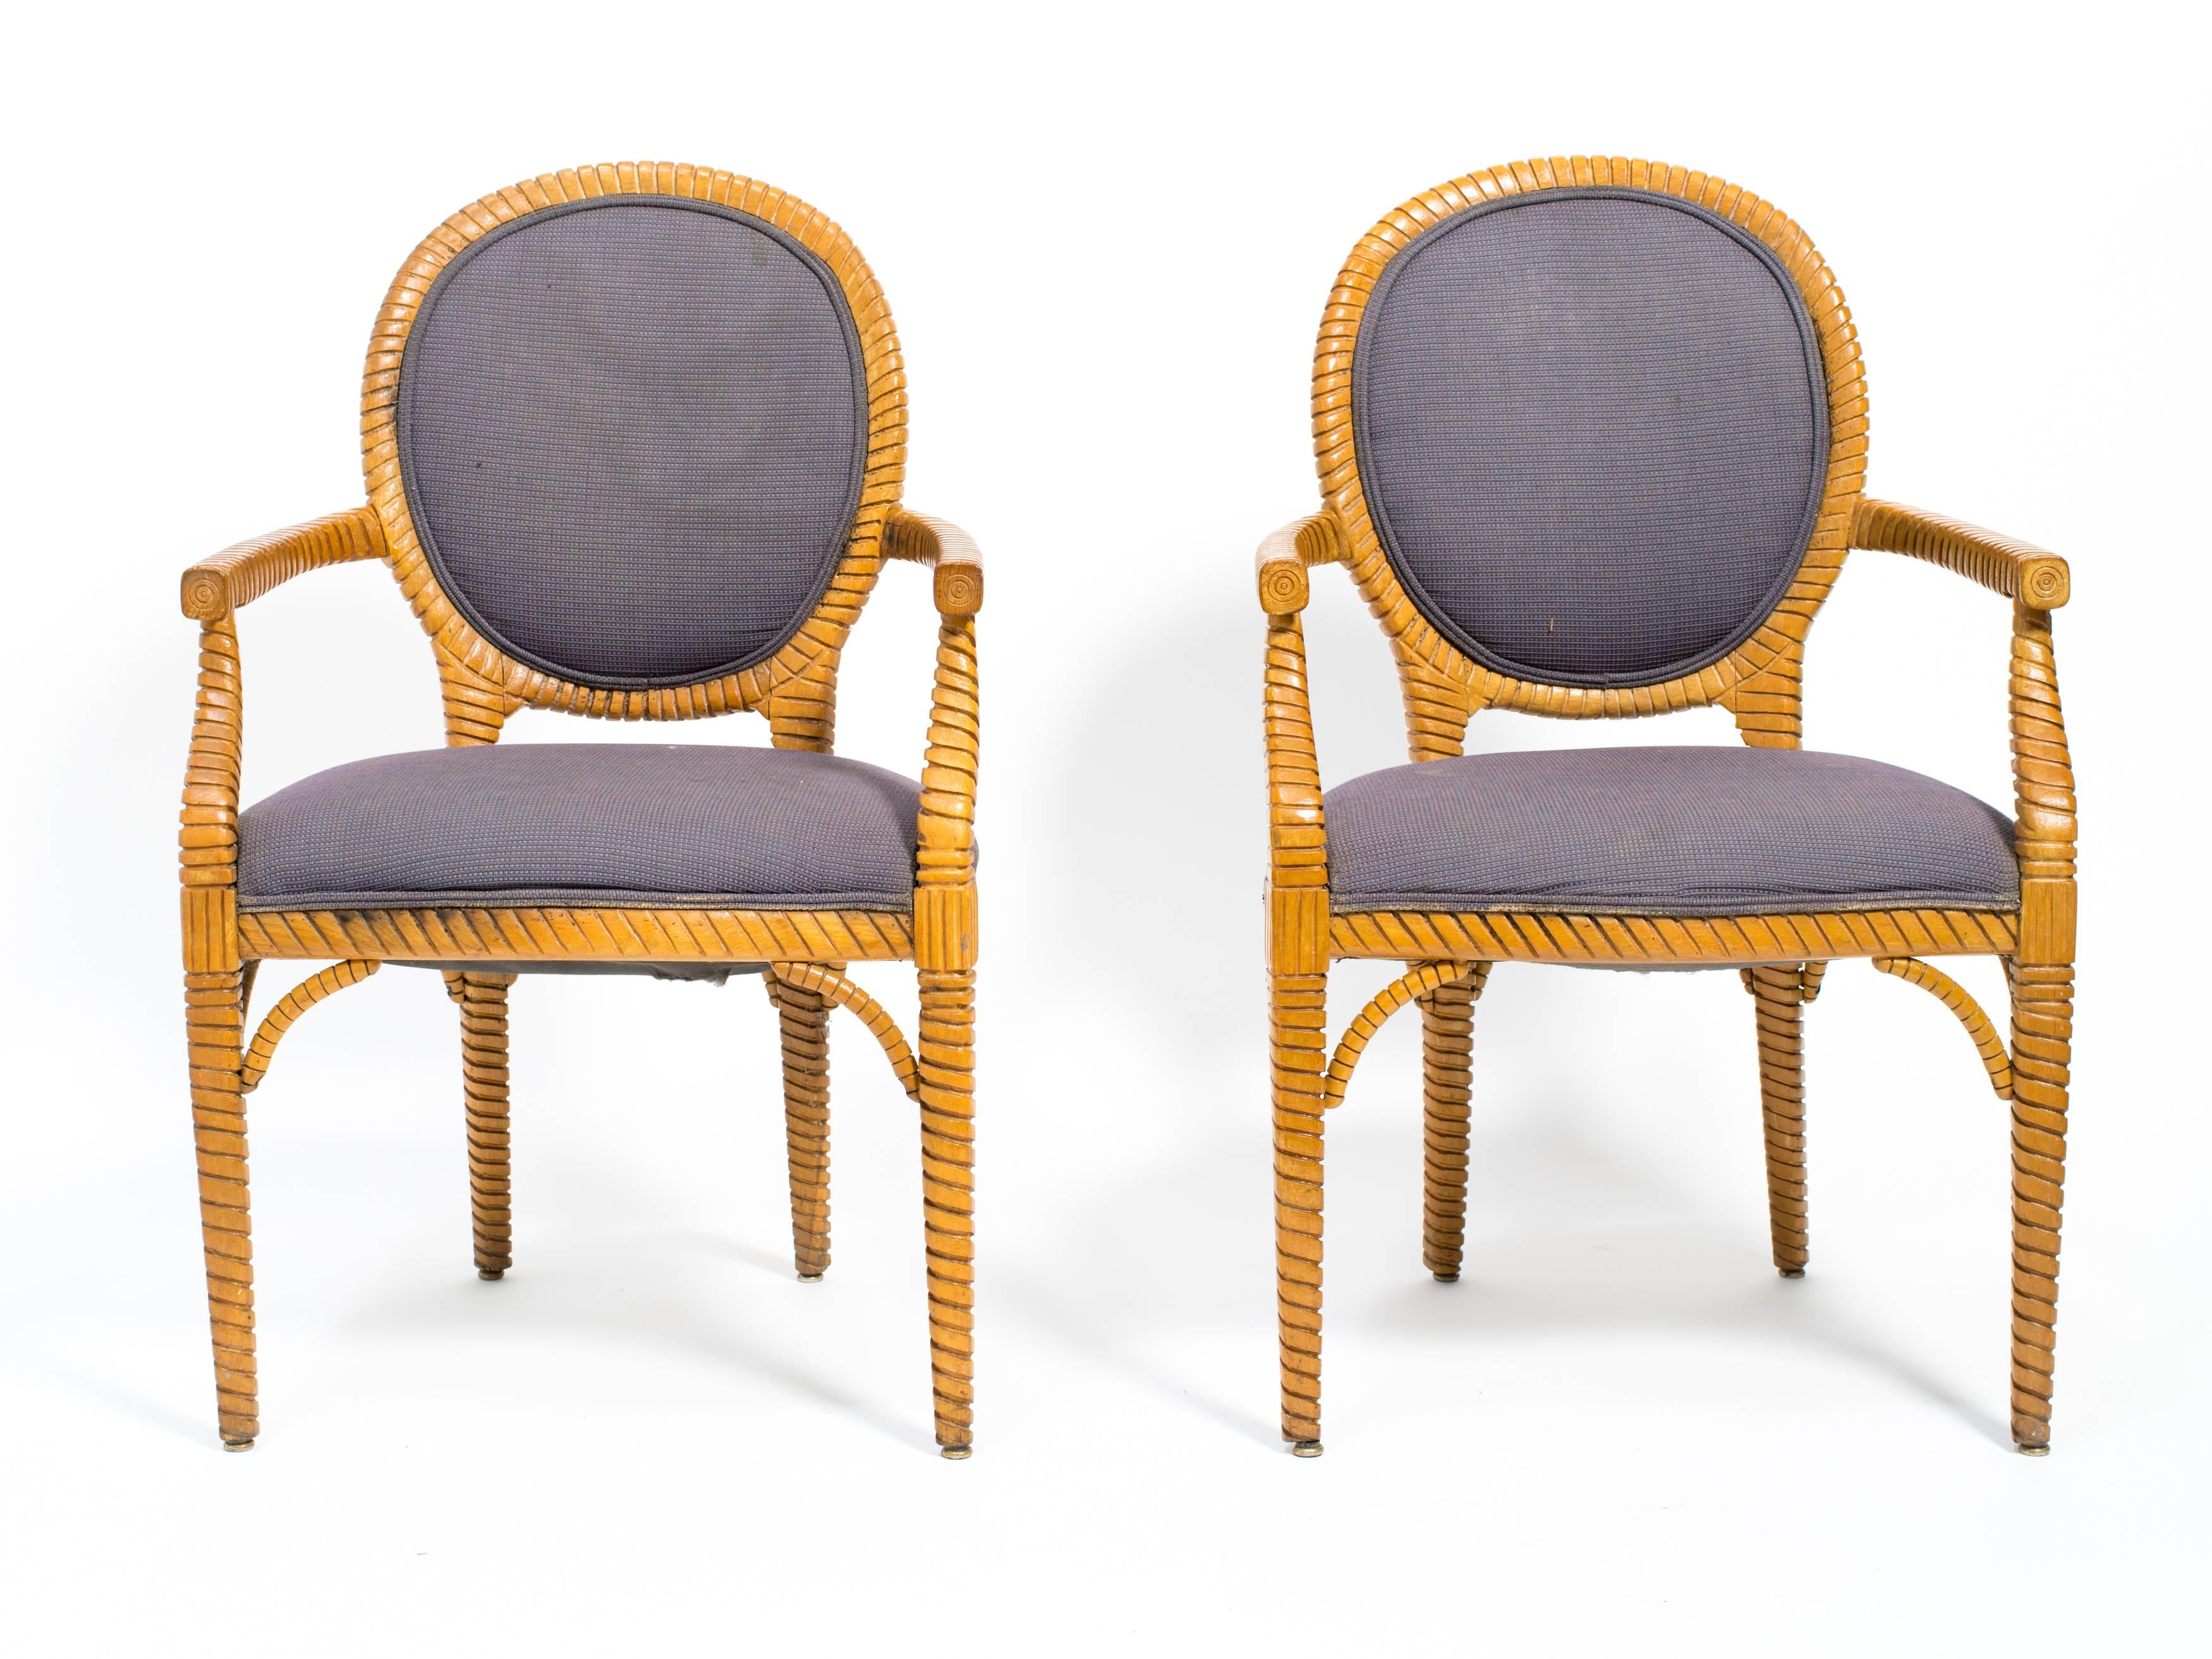 Pair of Carved Wood Upholstered Armchairs In Good Condition For Sale In Tarrytown, NY